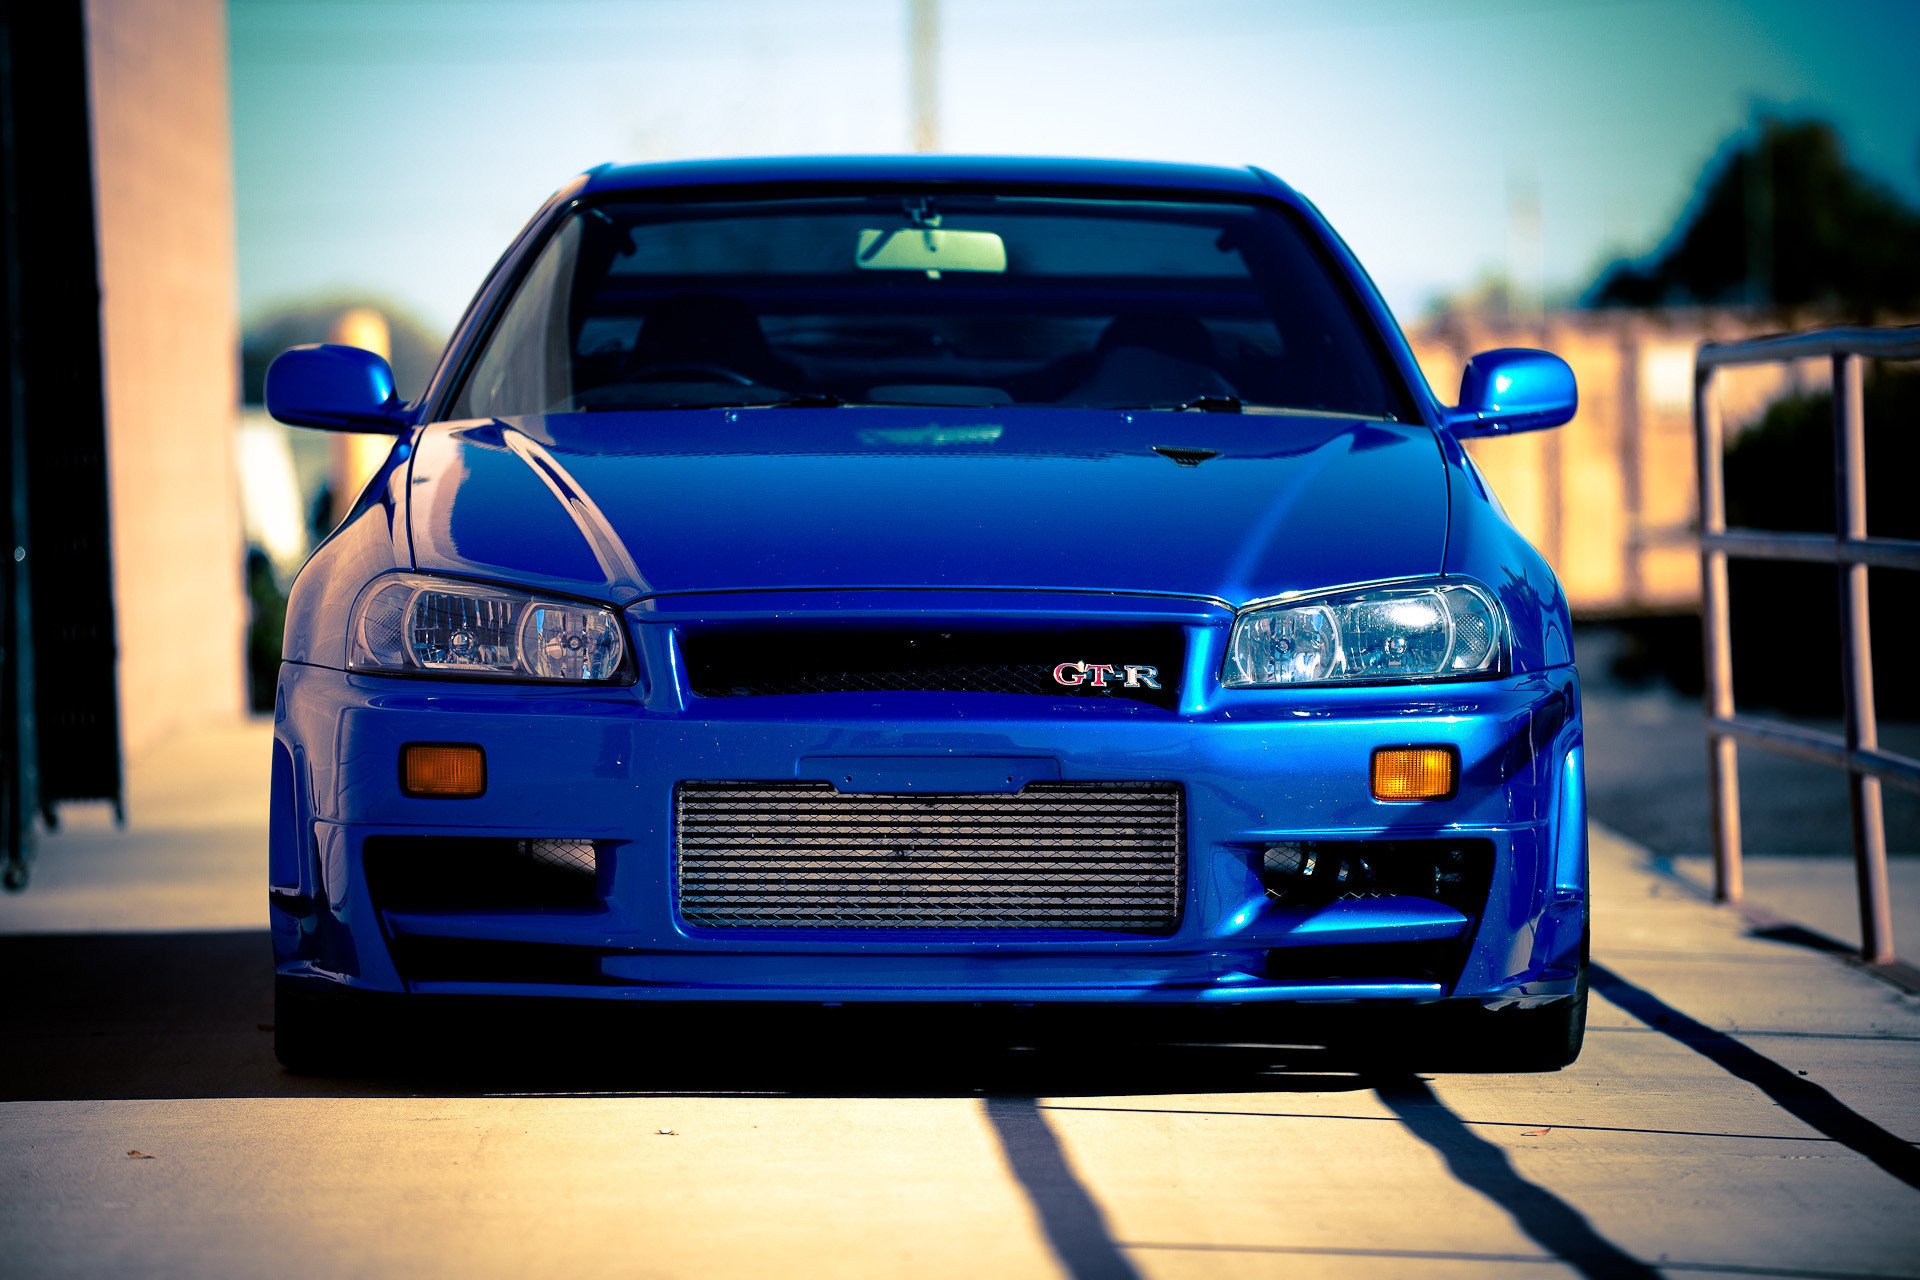 Nissan Skyline Gtr R Car Blue Tuning Wallpapers HD Desktop And Mobile Backgrounds